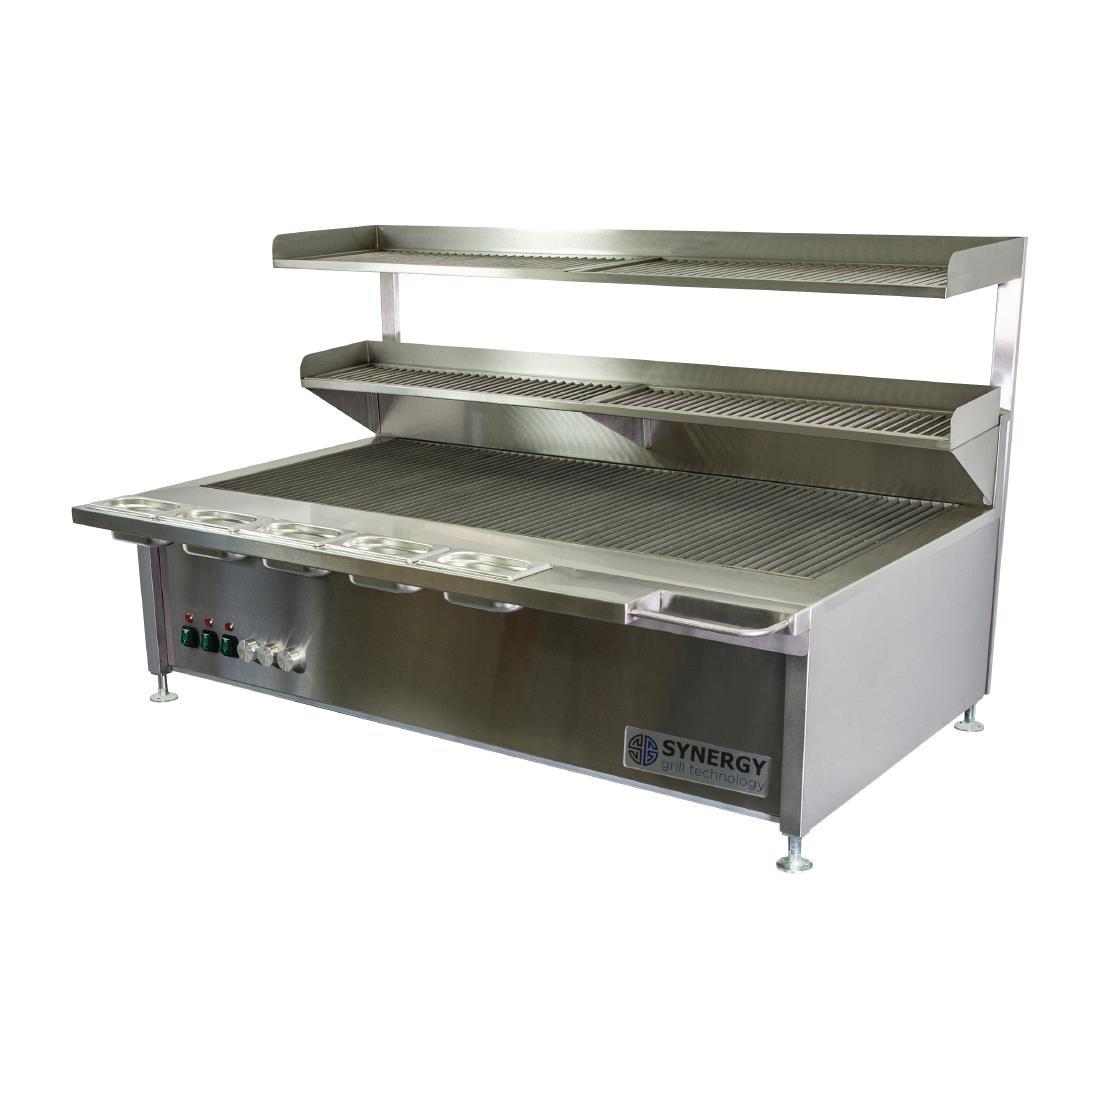 Synergy ST1300 Grill with Garnish Rail and Slow Cook Shelf - FD493  - 2